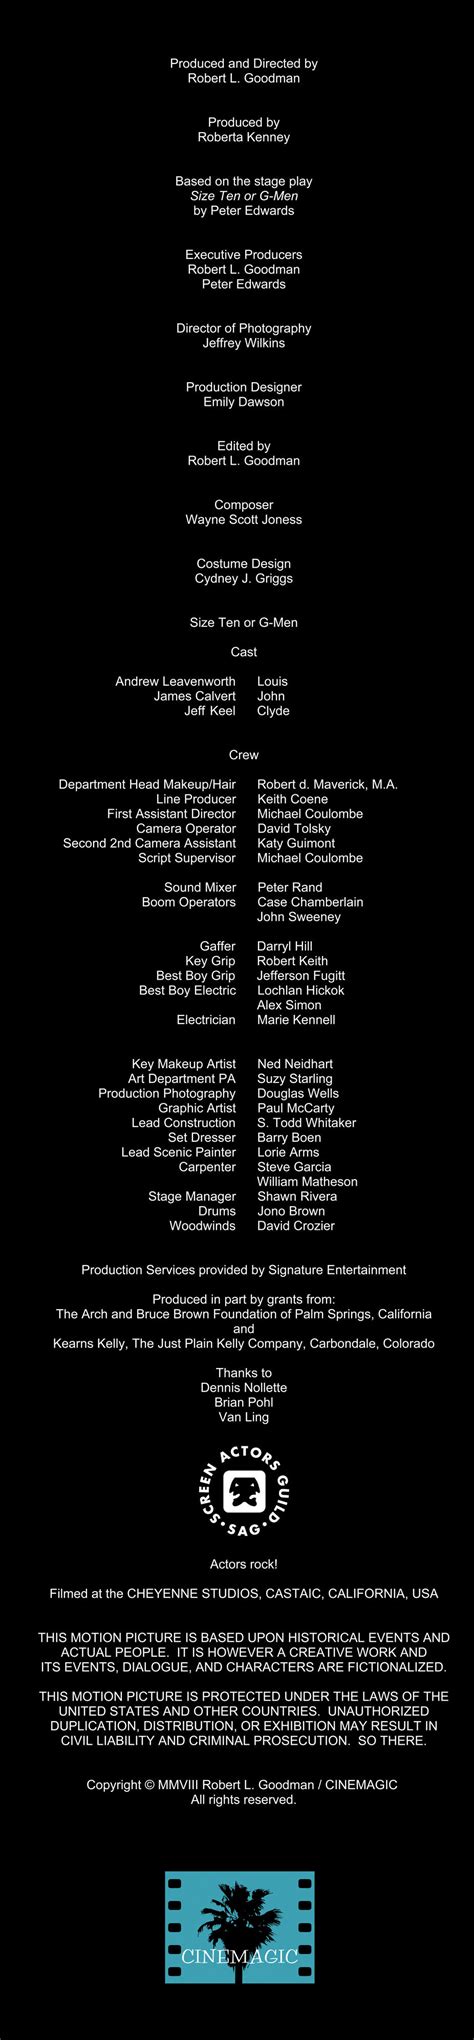 Down South & Dirty lyrics credits, cast, crew of song